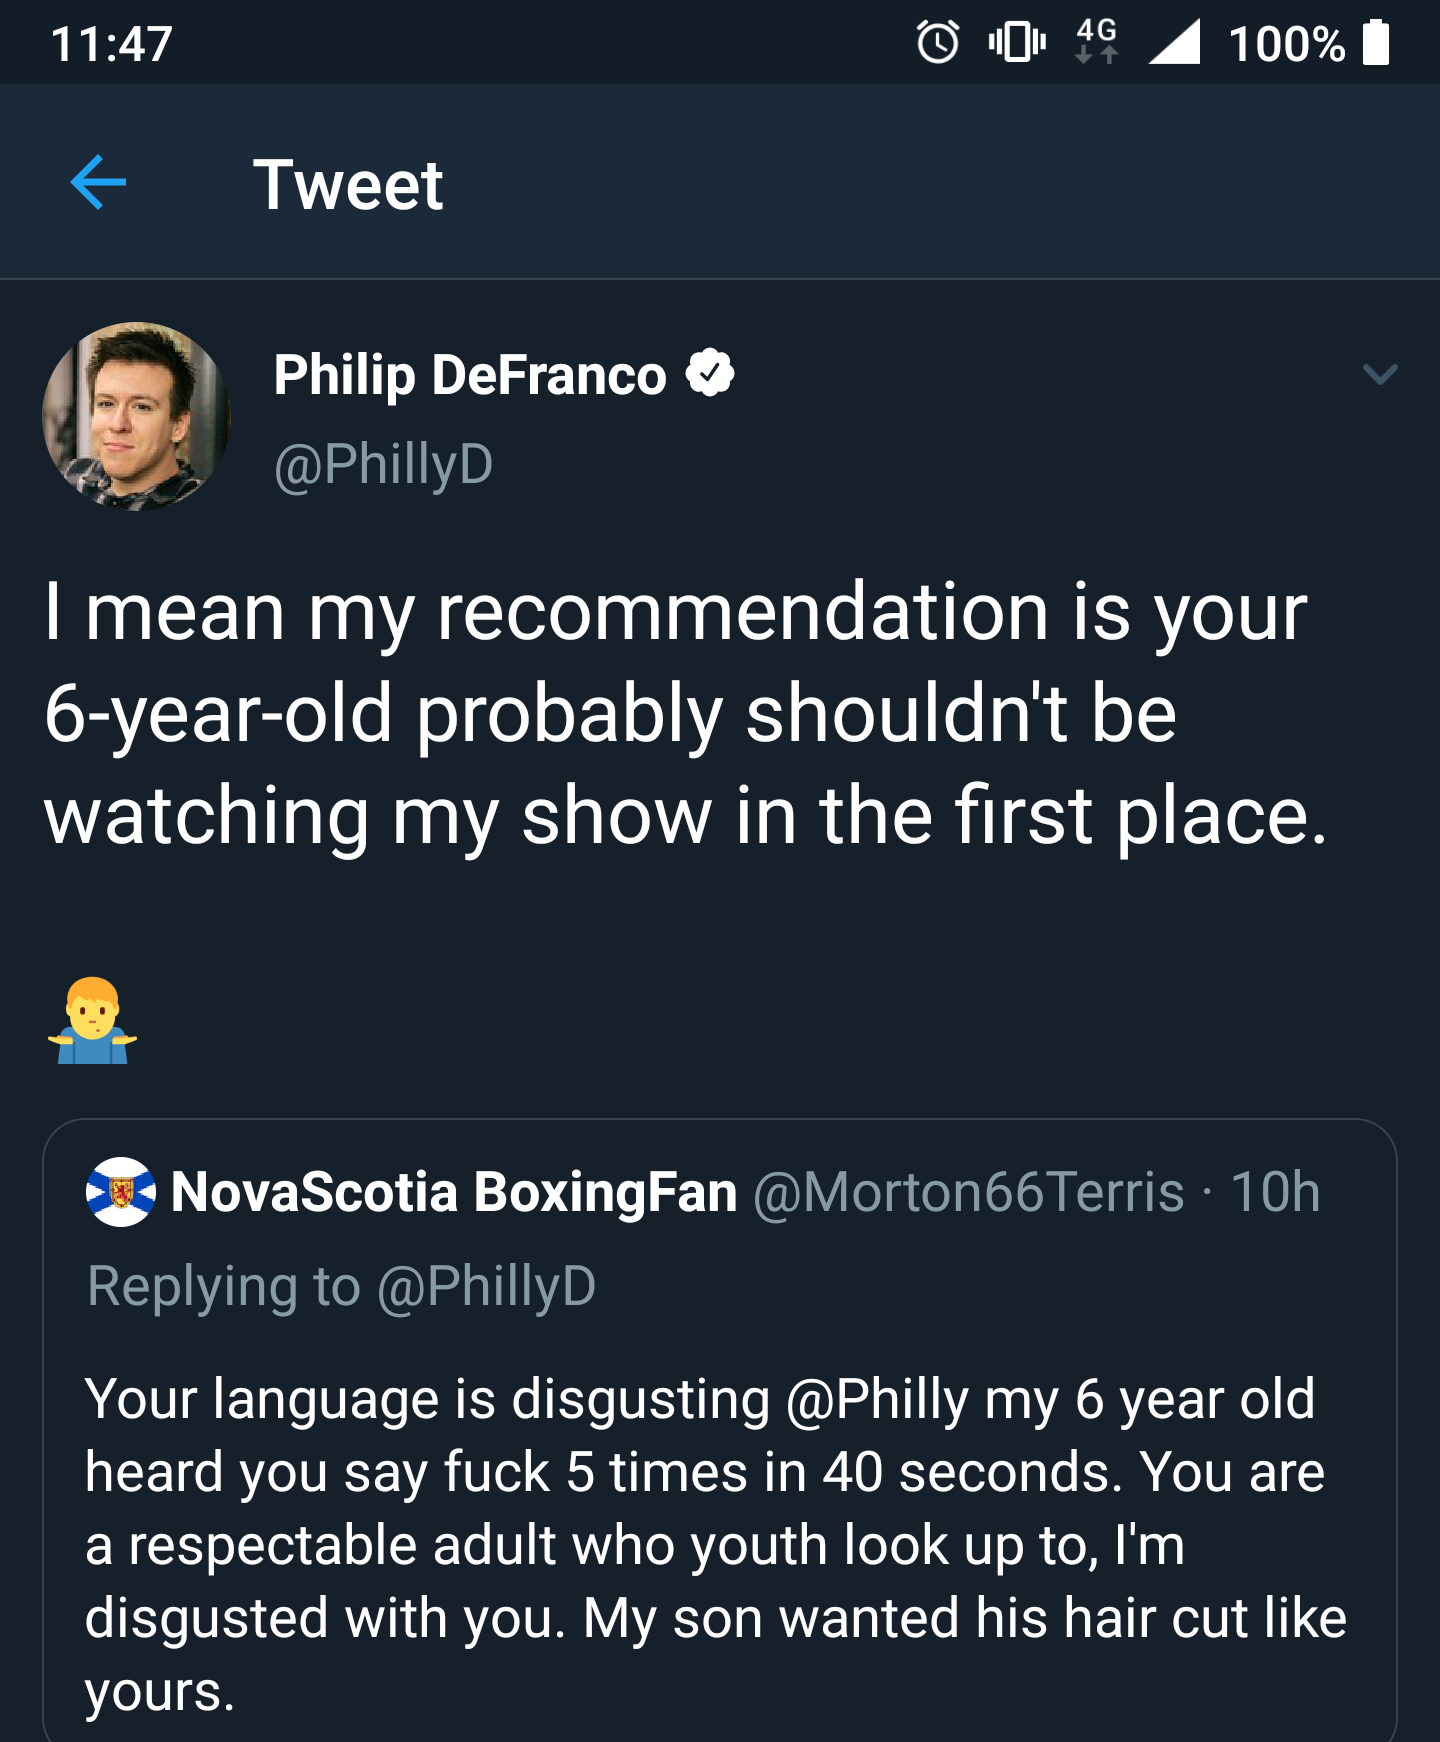 lyrics - 20 46 100% | Tweet Philip DeFranco I mean my recommendation is your 6yearold probably shouldn't be watching my show in the first place. Nova Scotia BoxingFan 10h Your language is disgusting my 6 year old heard you say fuck 5 times in 40 seconds. 